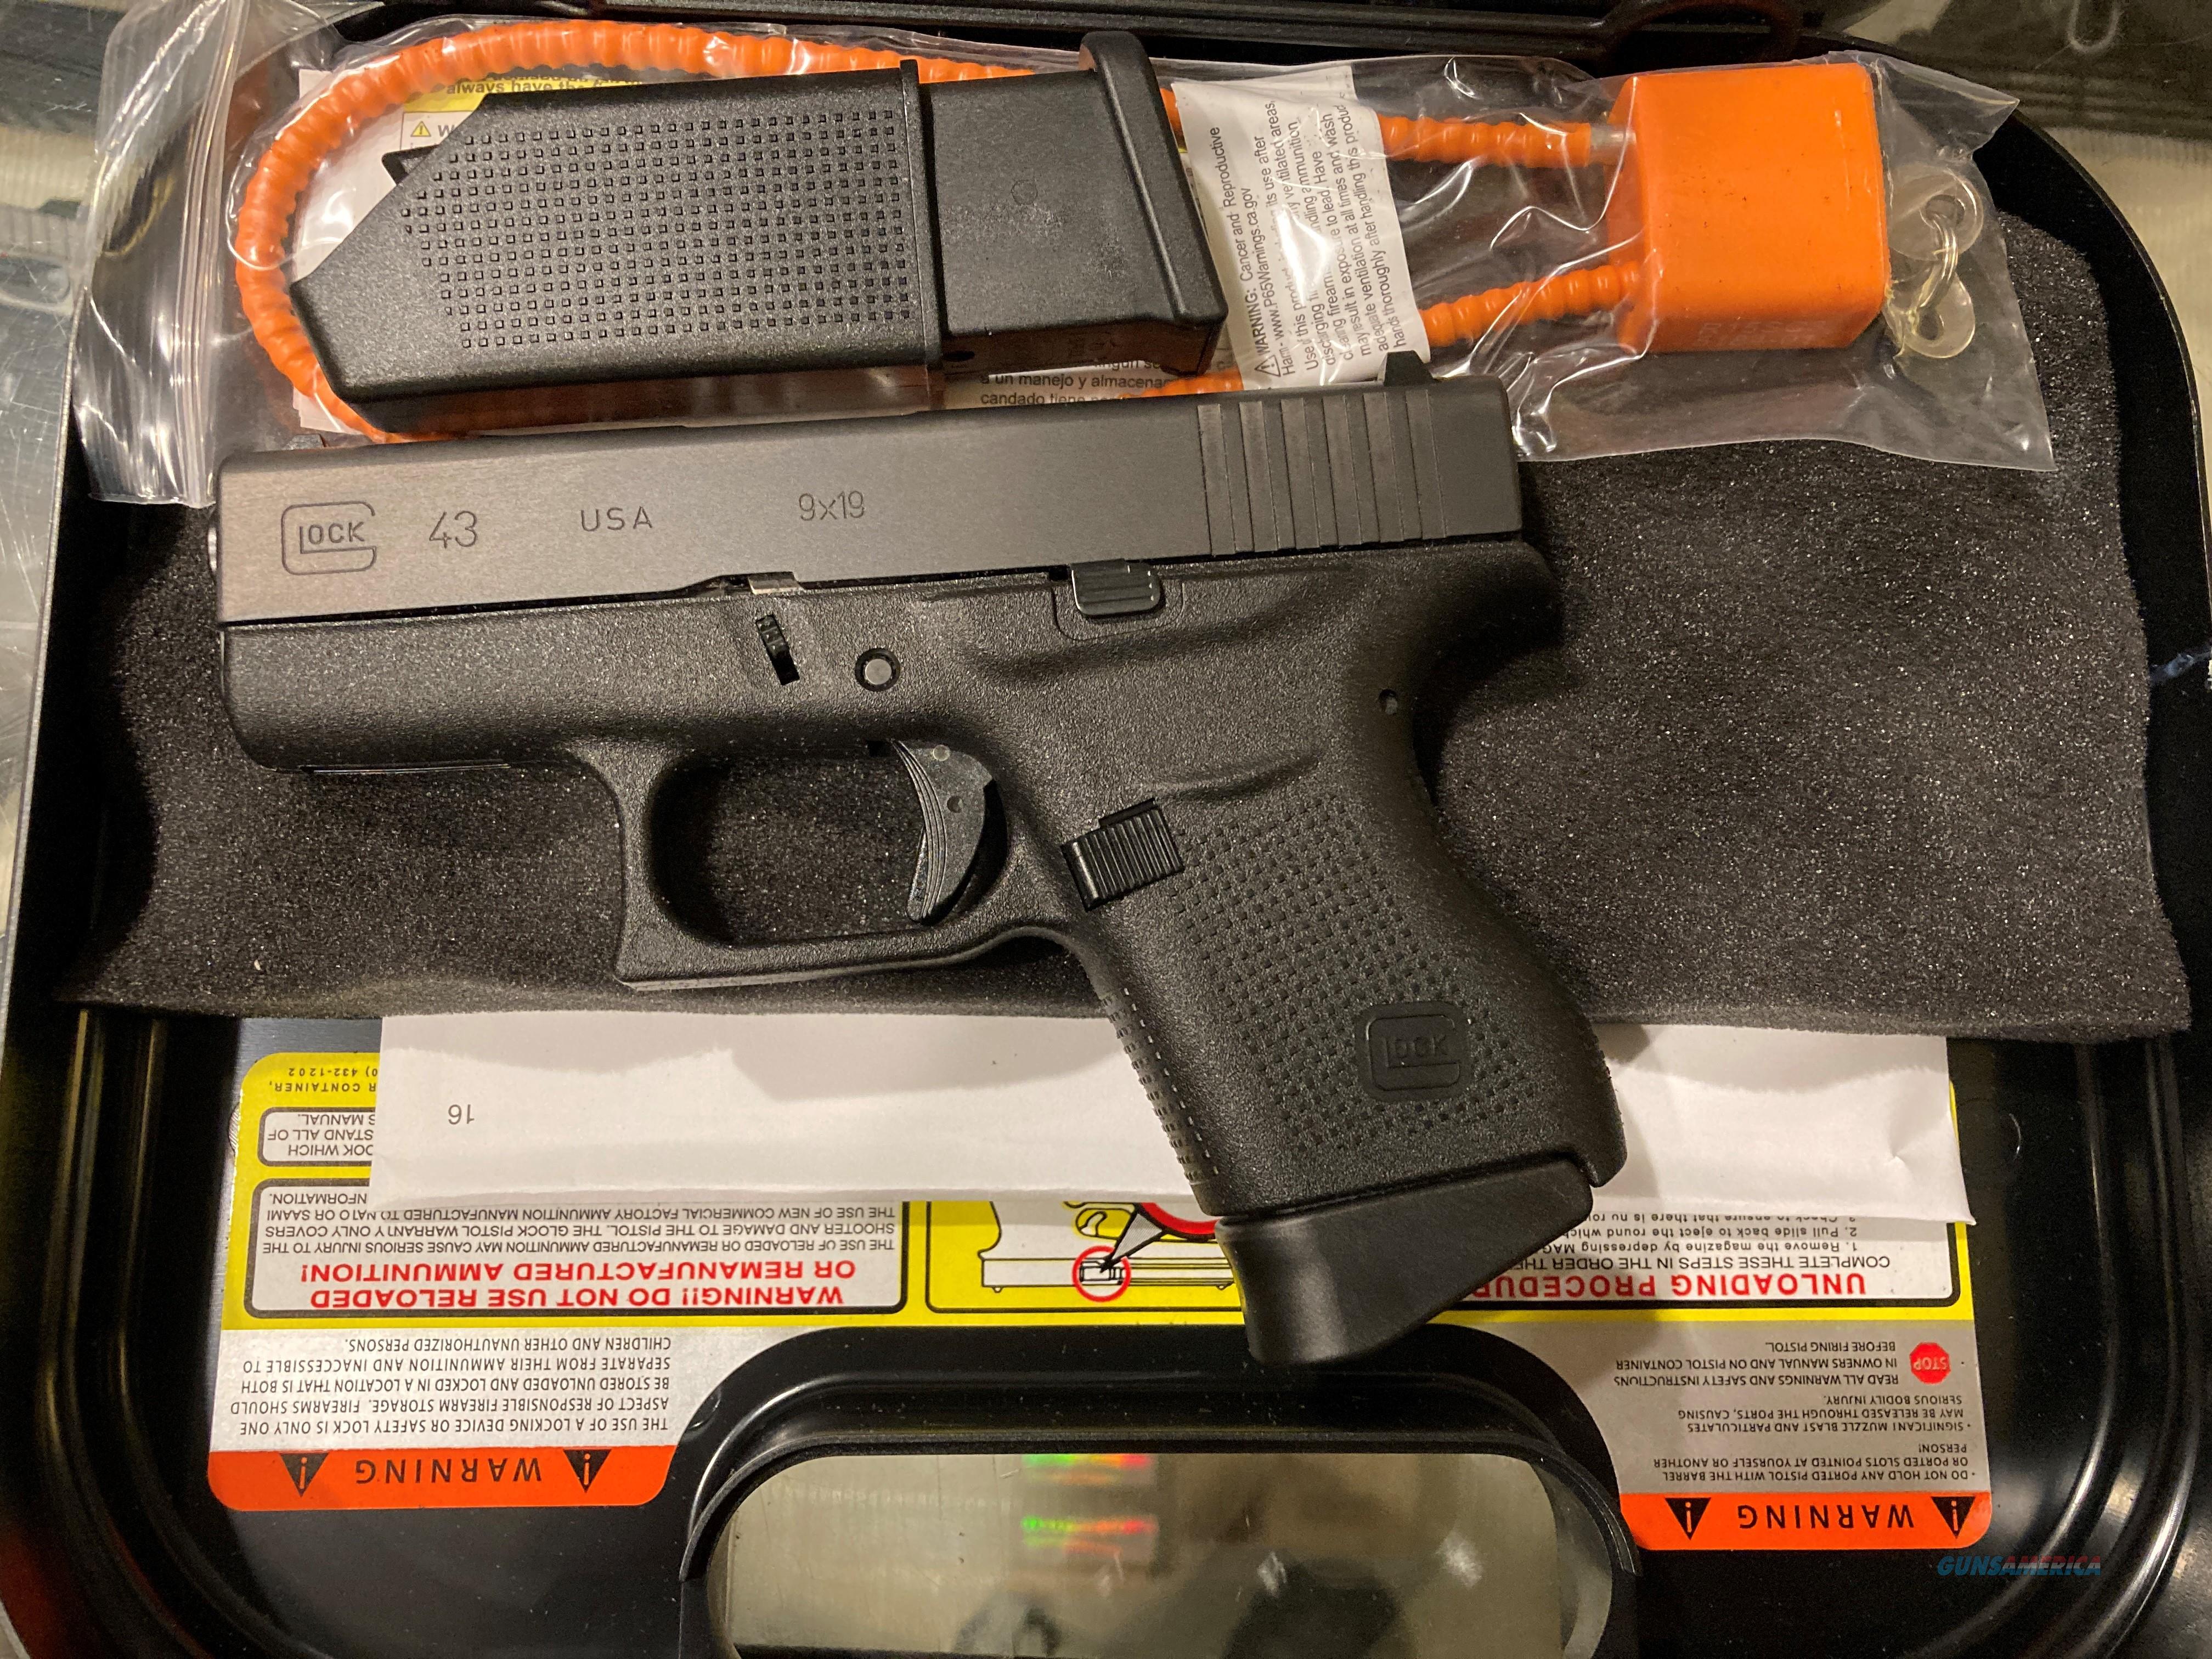 Glock 43 In 9mm G43 Smallest Glock For Sale At 919324375 0117